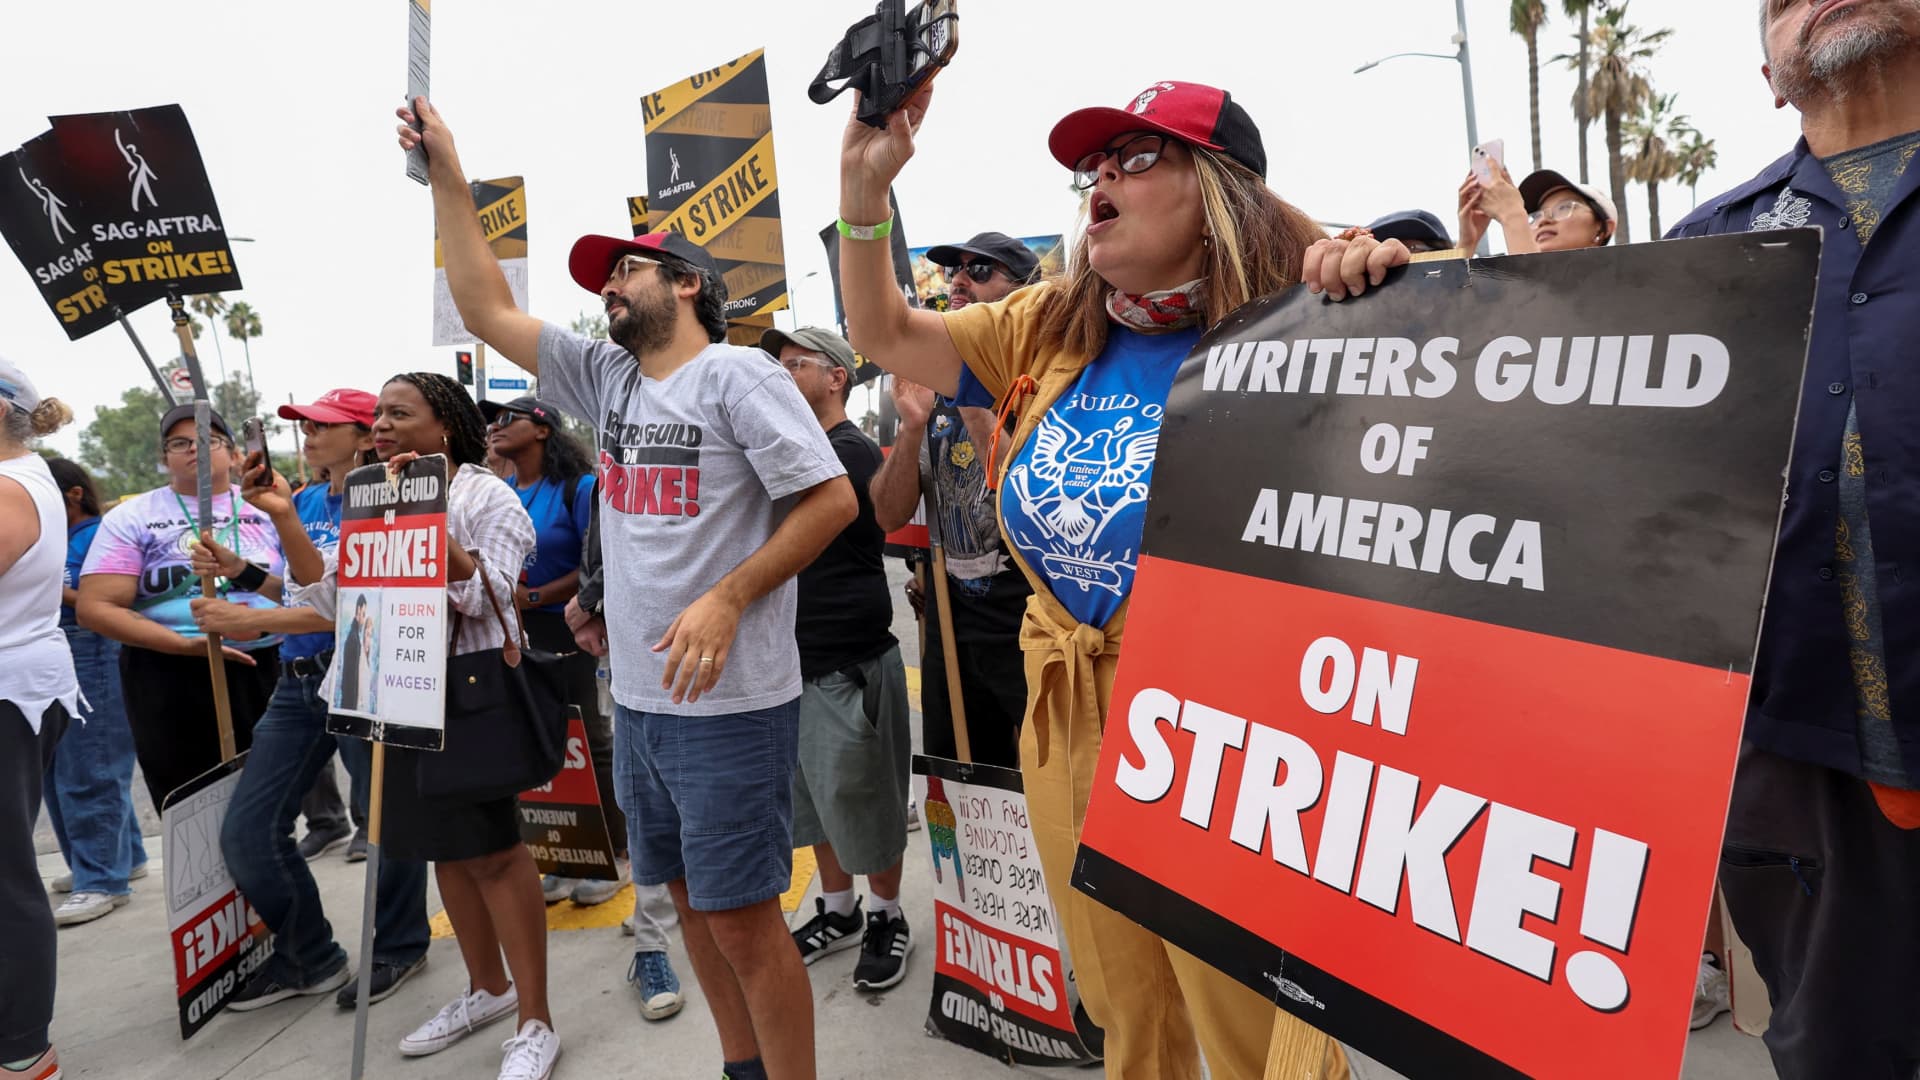 SAG-AFTRA actors and Writers Guild of America (WGA) writers walk the picket line during their ongoing strike outside Netflix offices in Los Angeles, California, September 22, 2023.